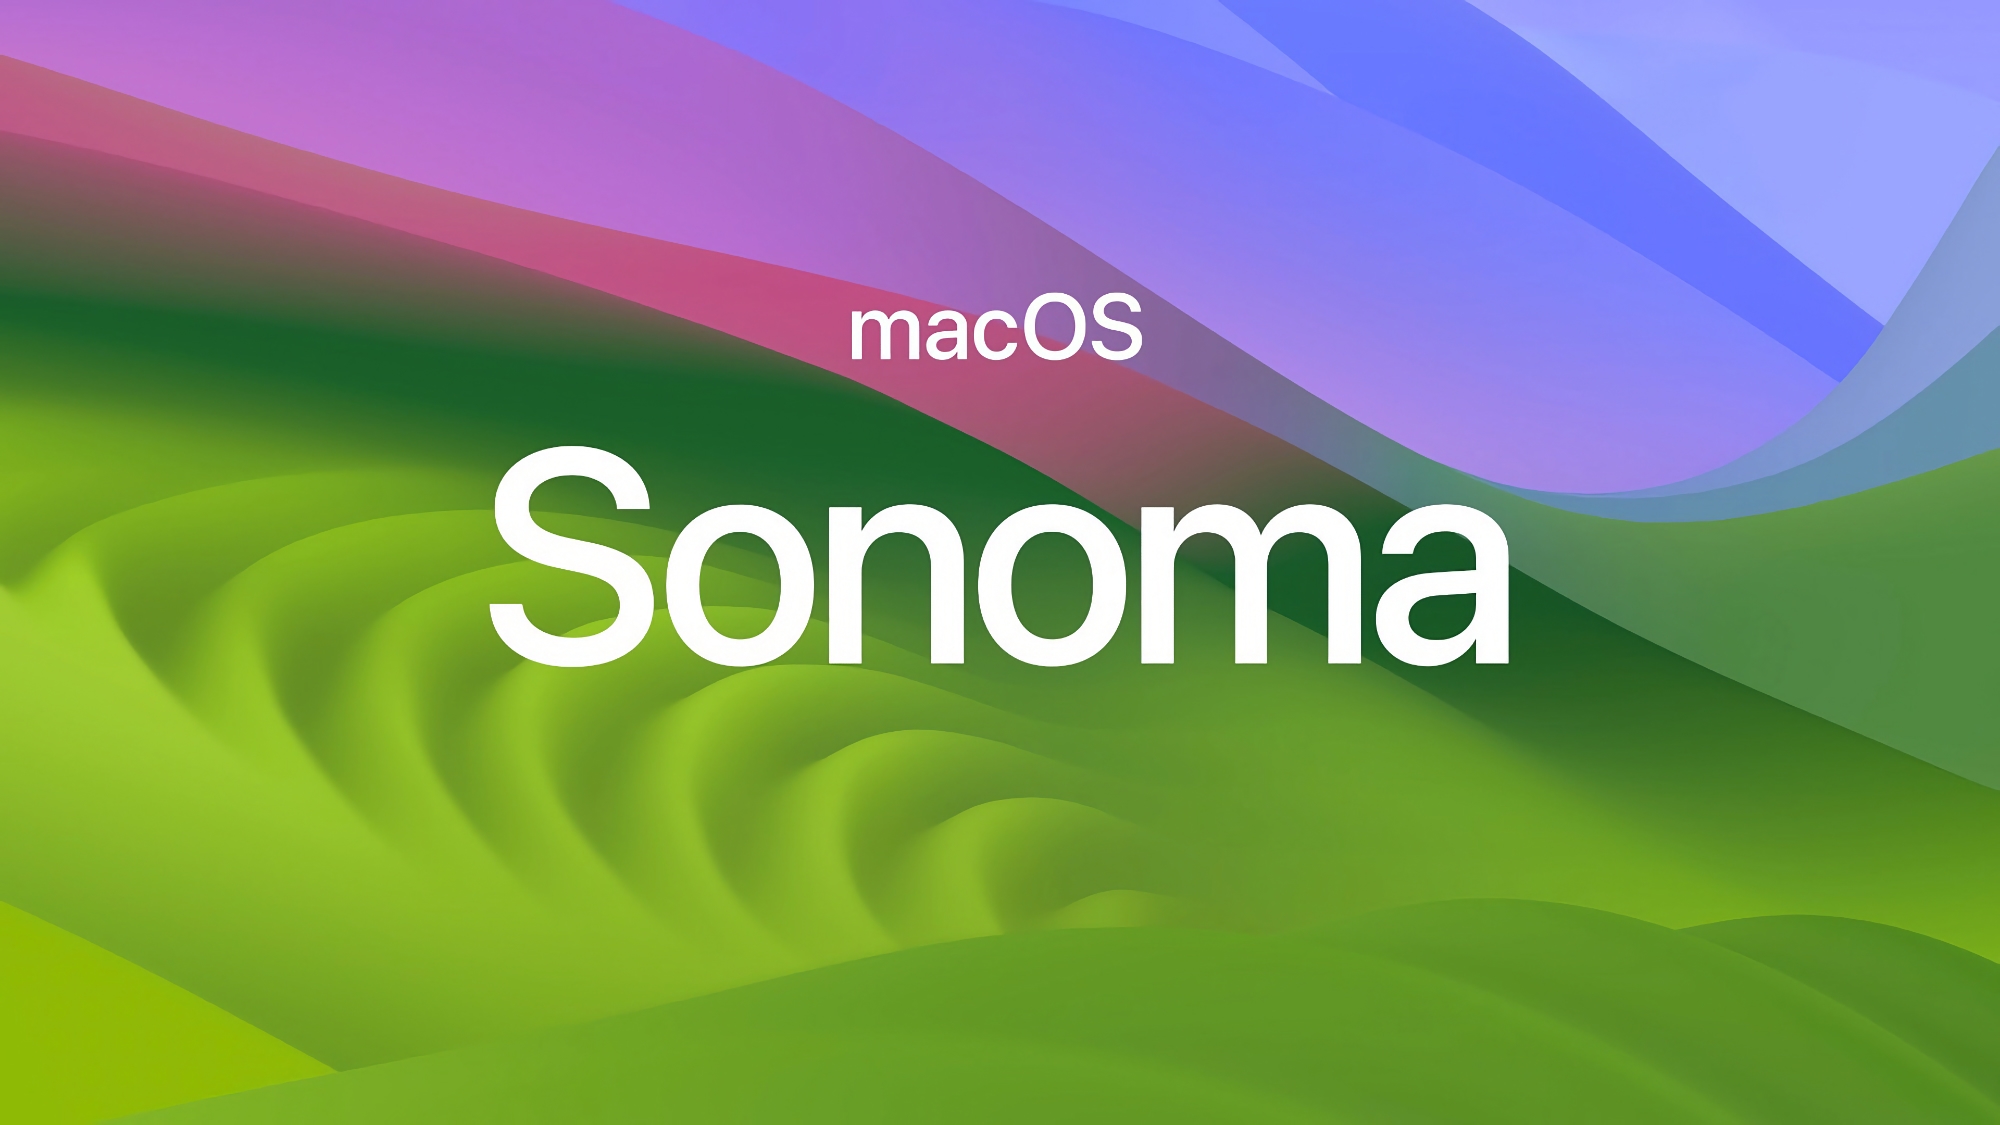 Following iOS 17.5 Beta 1: the first developer beta of macOS Sonoma 14.5 has been released